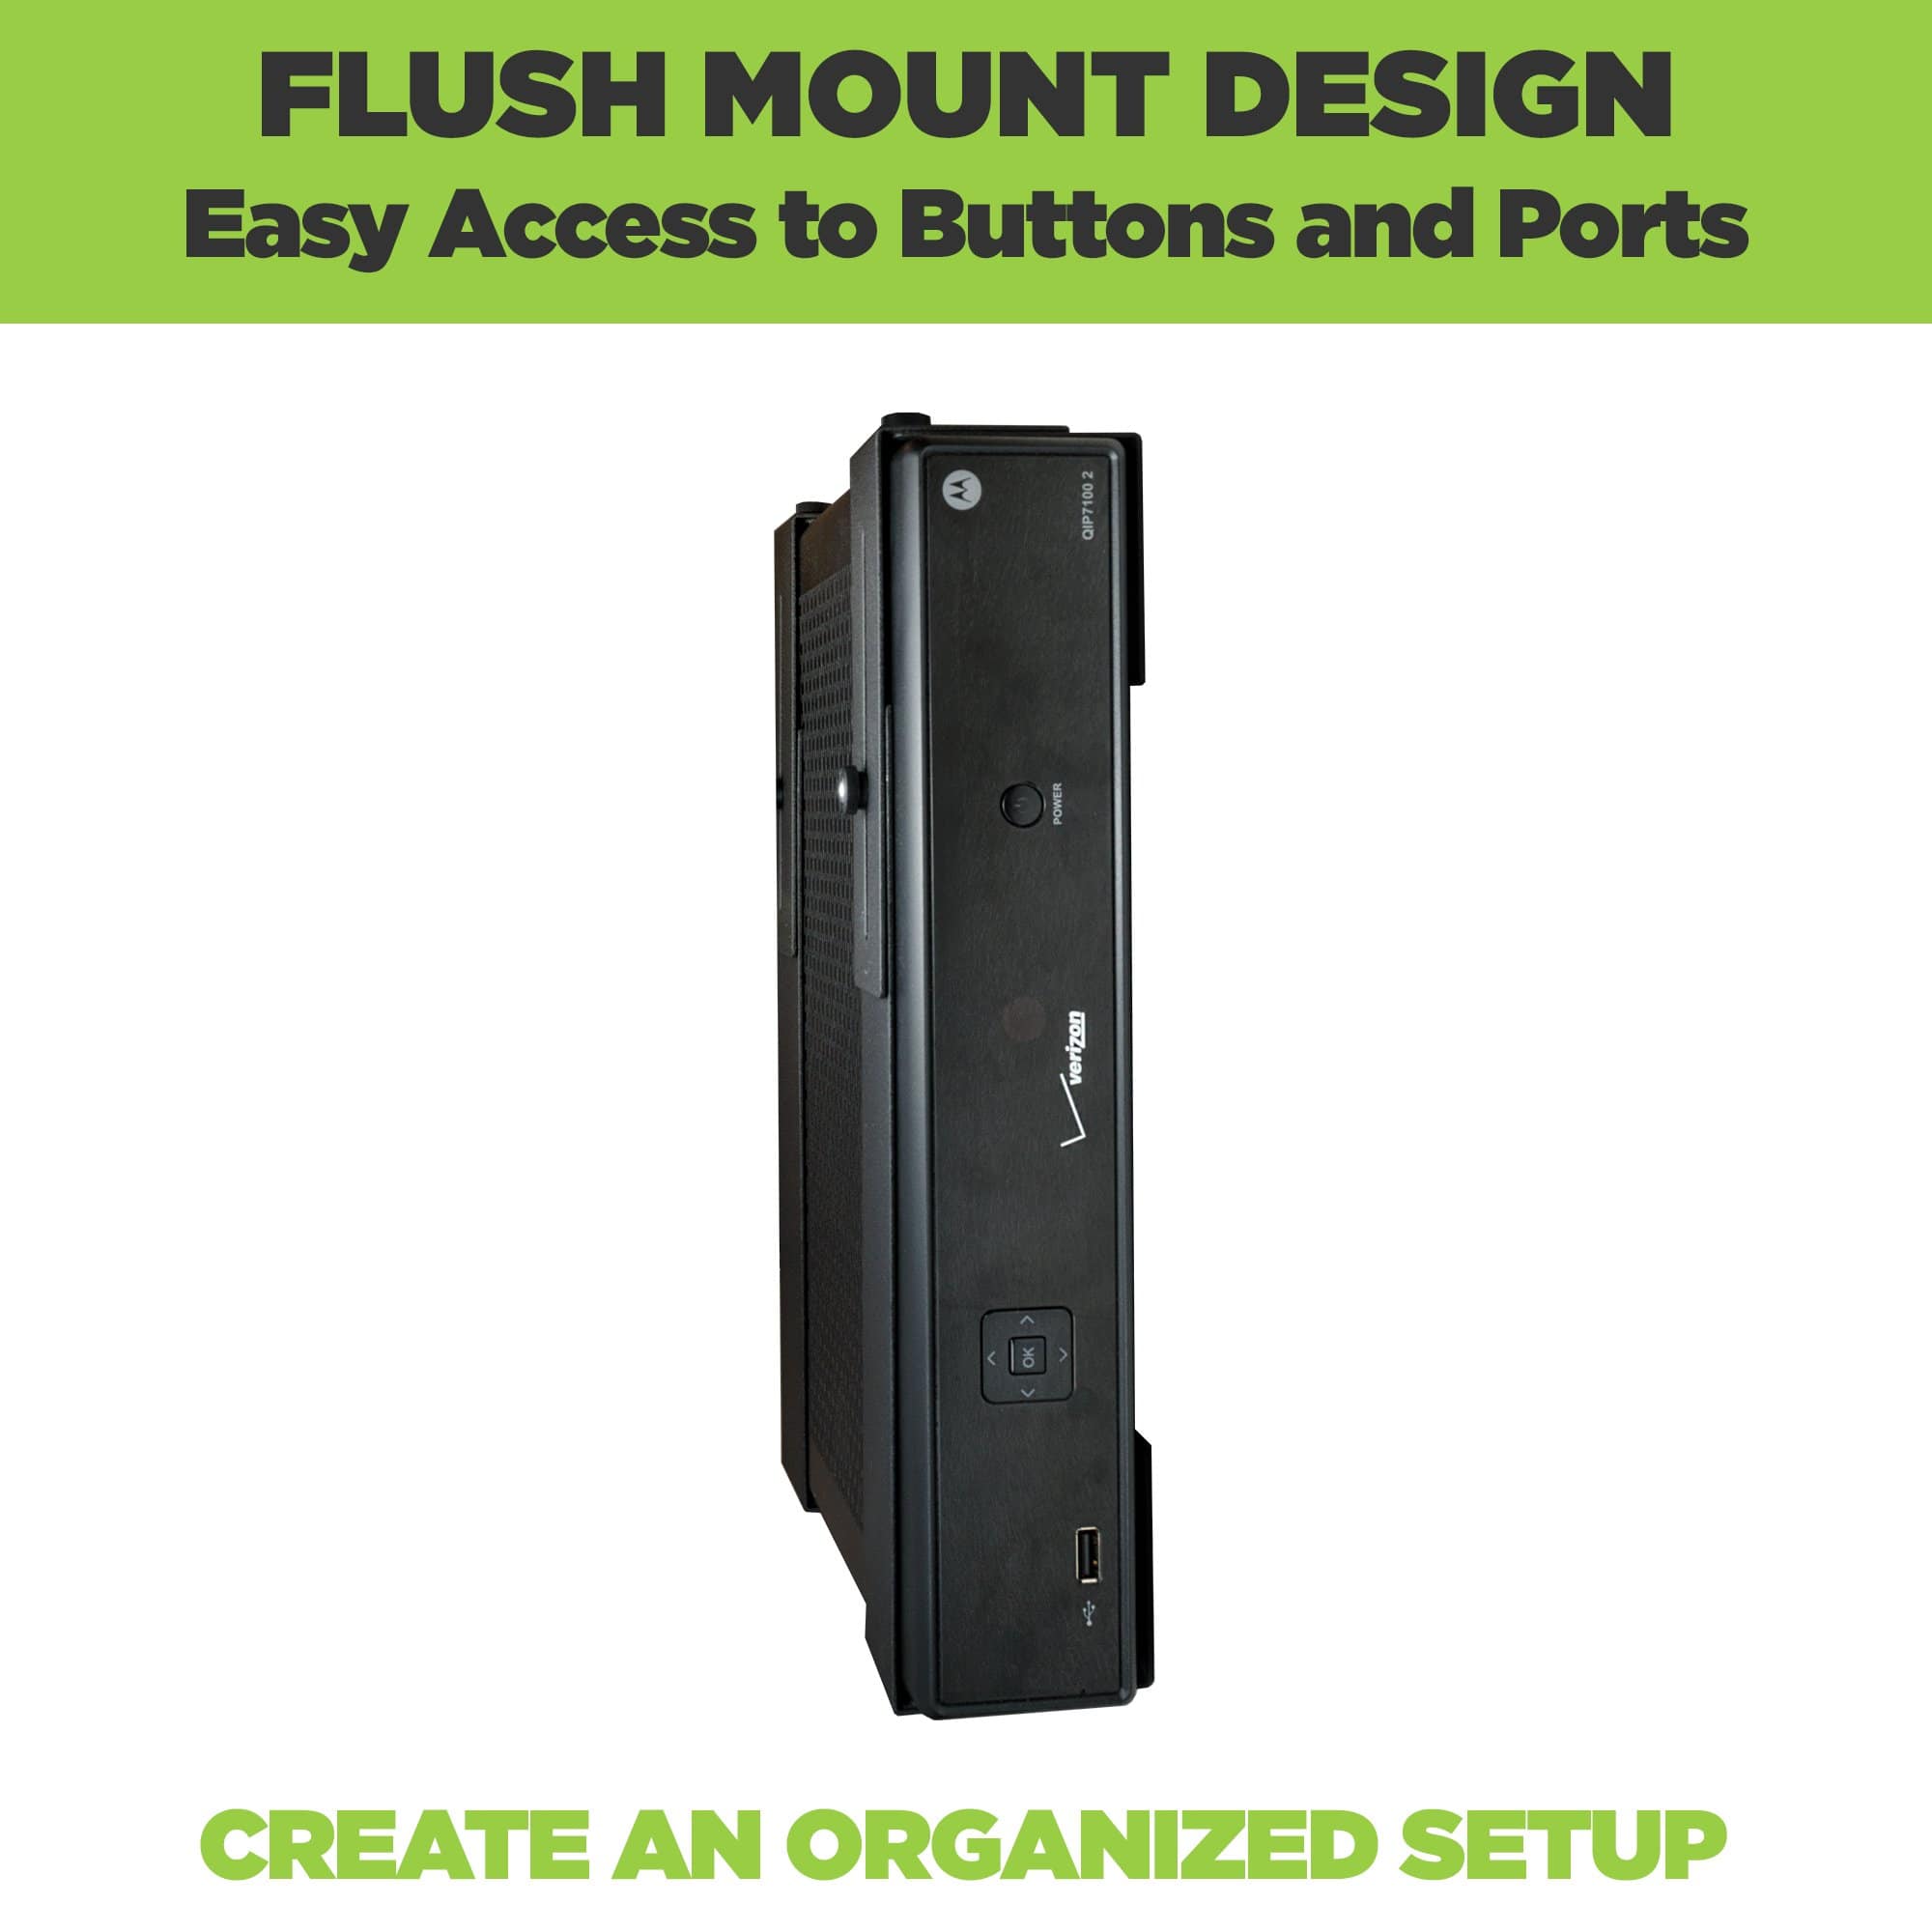 Medium-sized electronic device mounted in a universal + adjustable HIDEit wall mount.